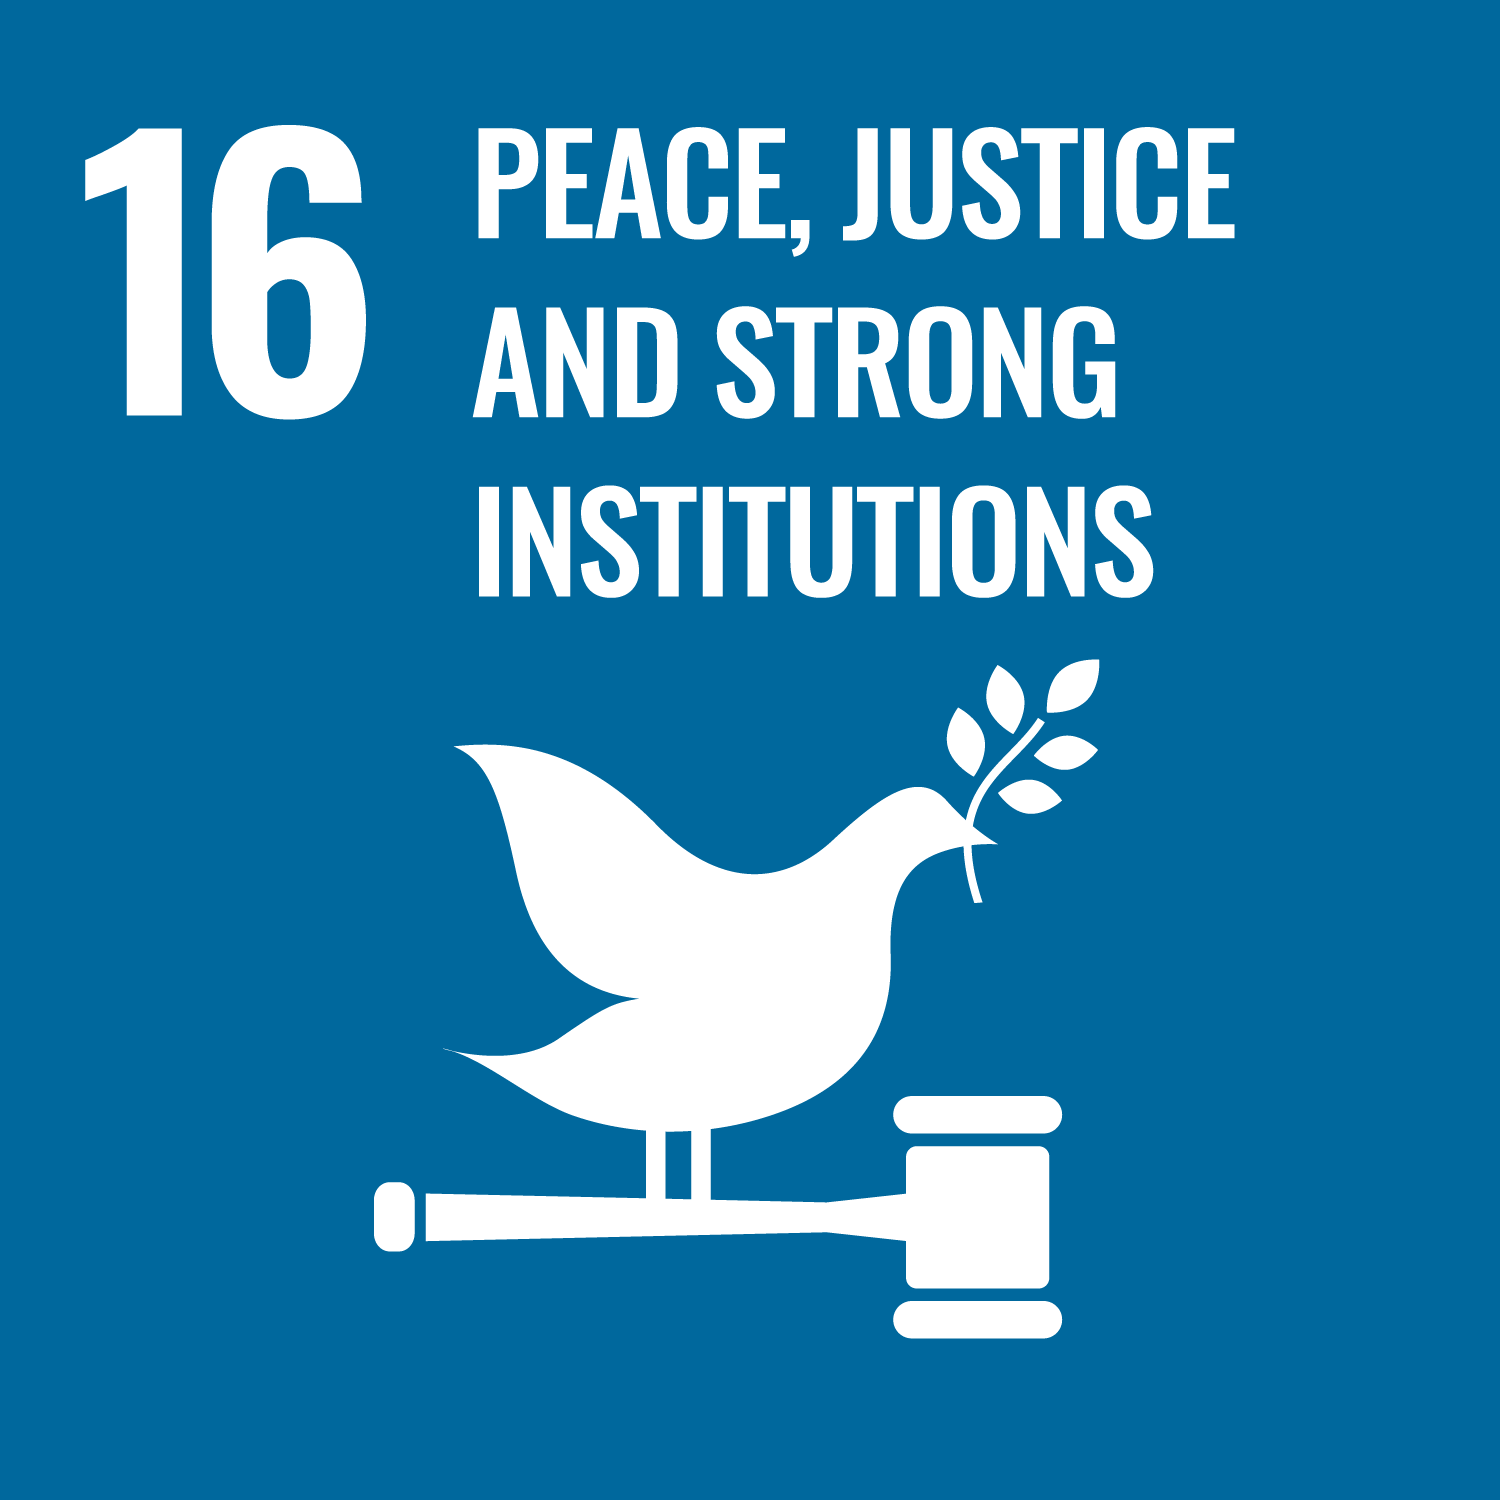 UN sustainable development goal 16 peace, justice, and strong institutions